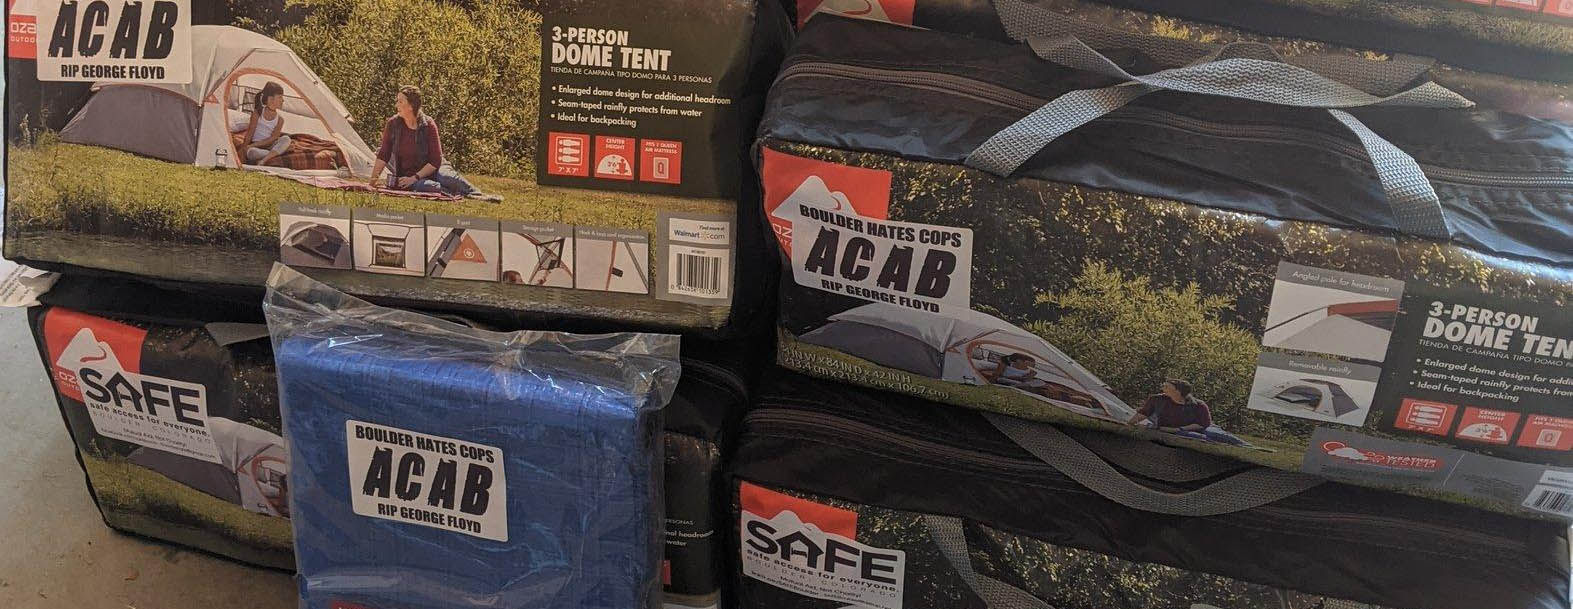 Packaged tents stacked on top of each other with ACAB stickers on them.